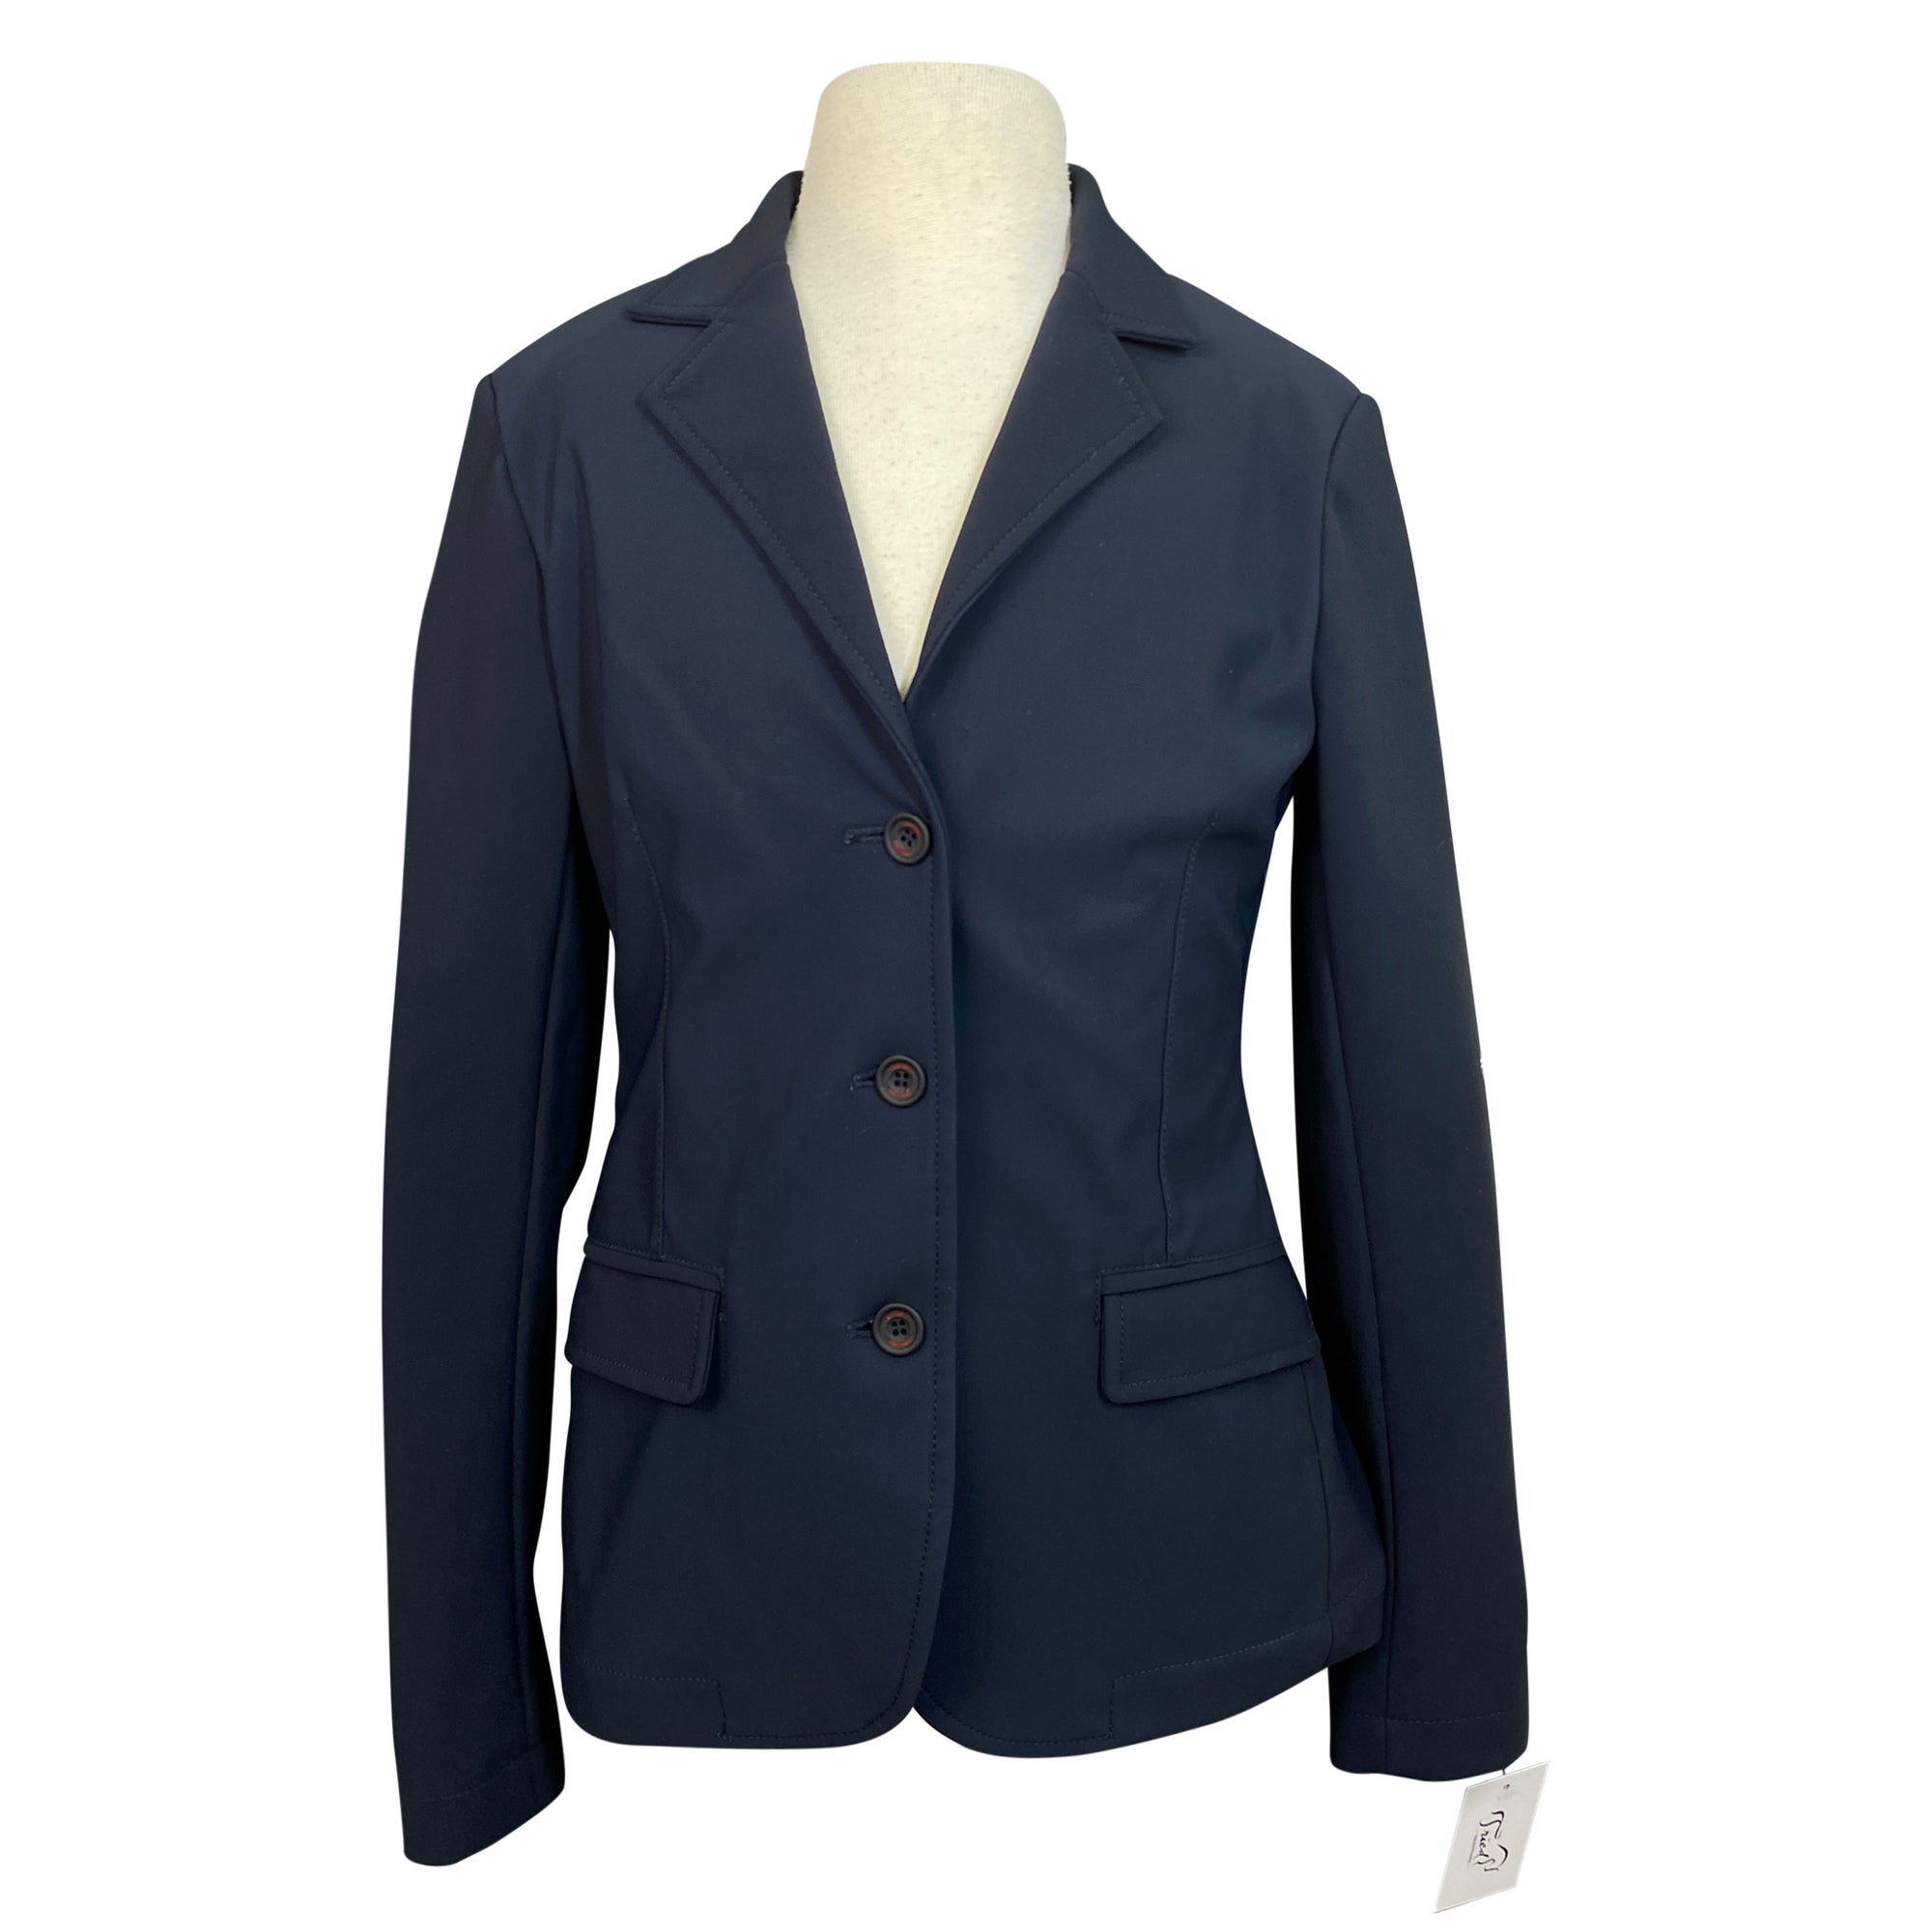 Cavalleria Toscana Competition Jacket in Navy